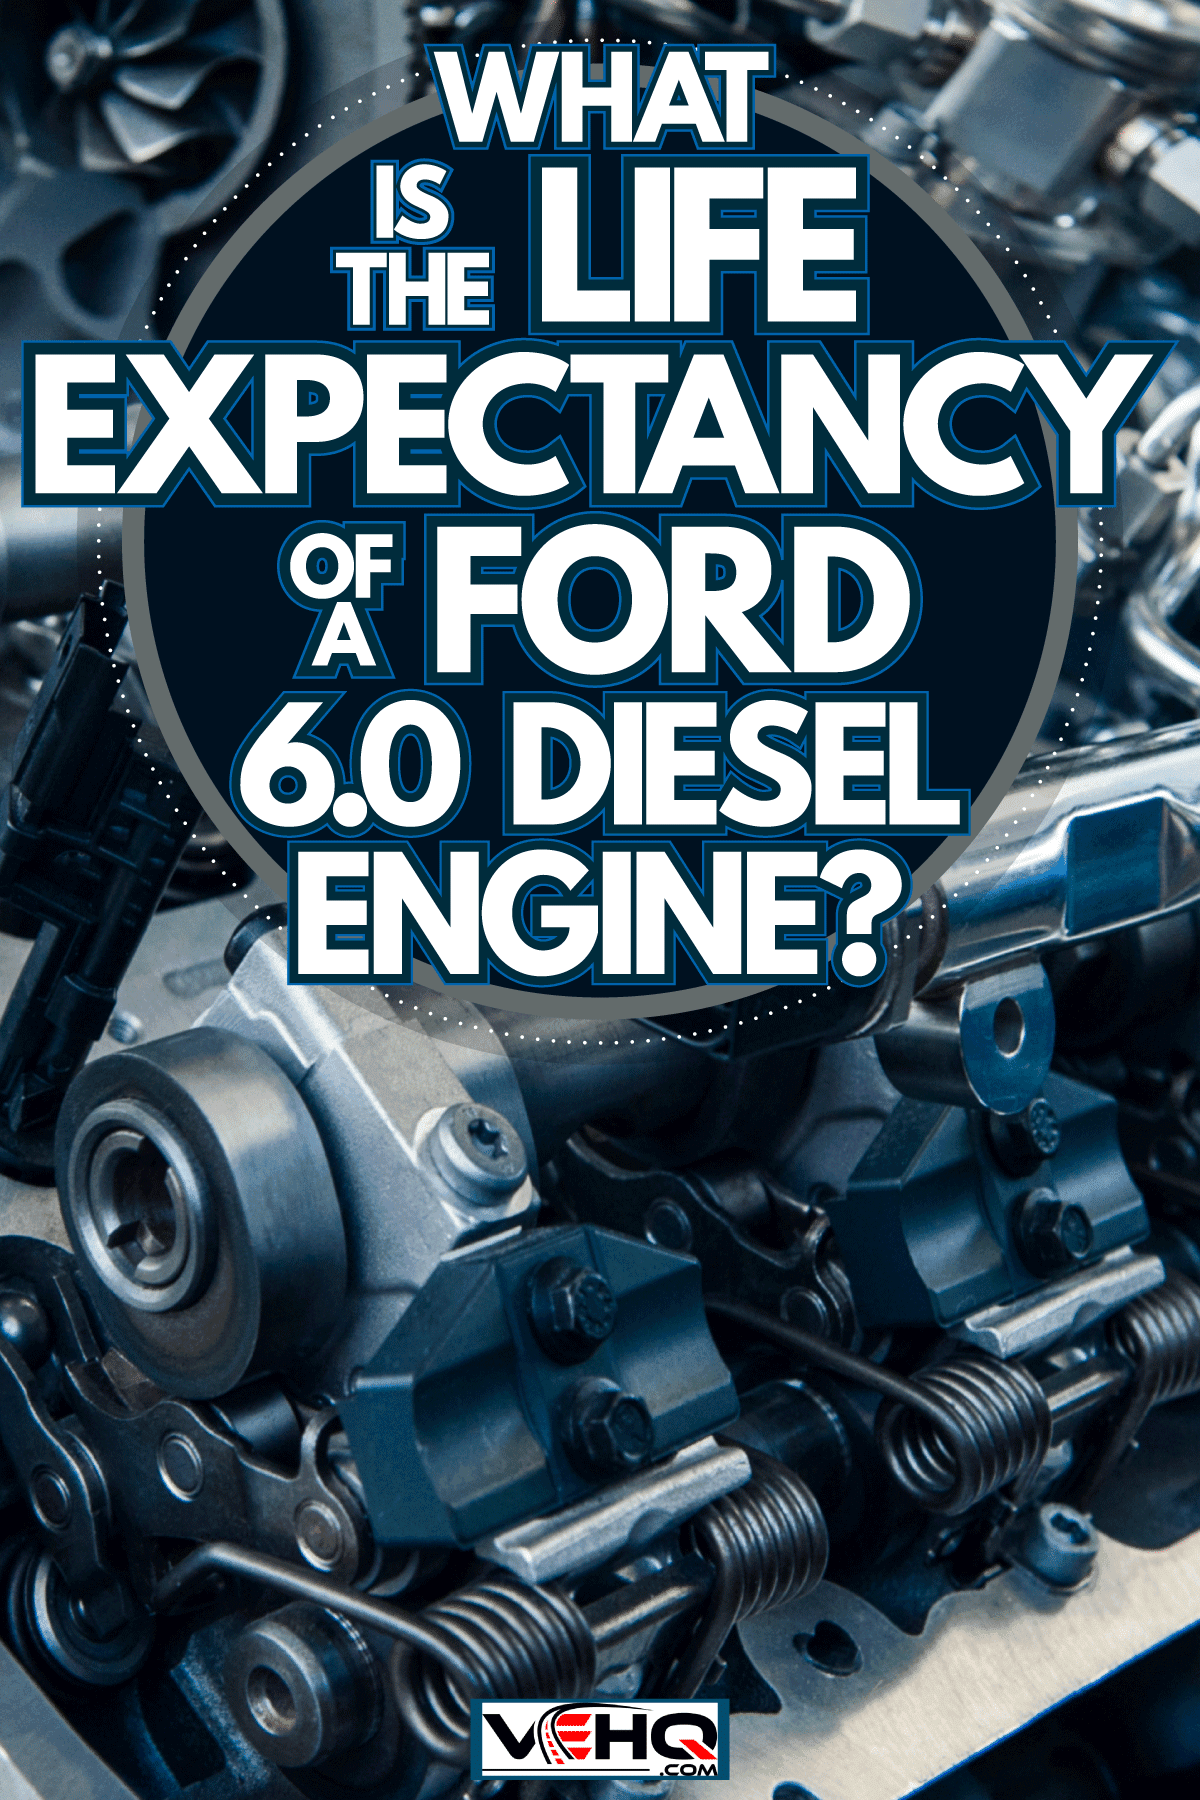 Huge 6.0L engine, What Is The Life Expectancy Of A Ford 6.0 Diesel Engine?